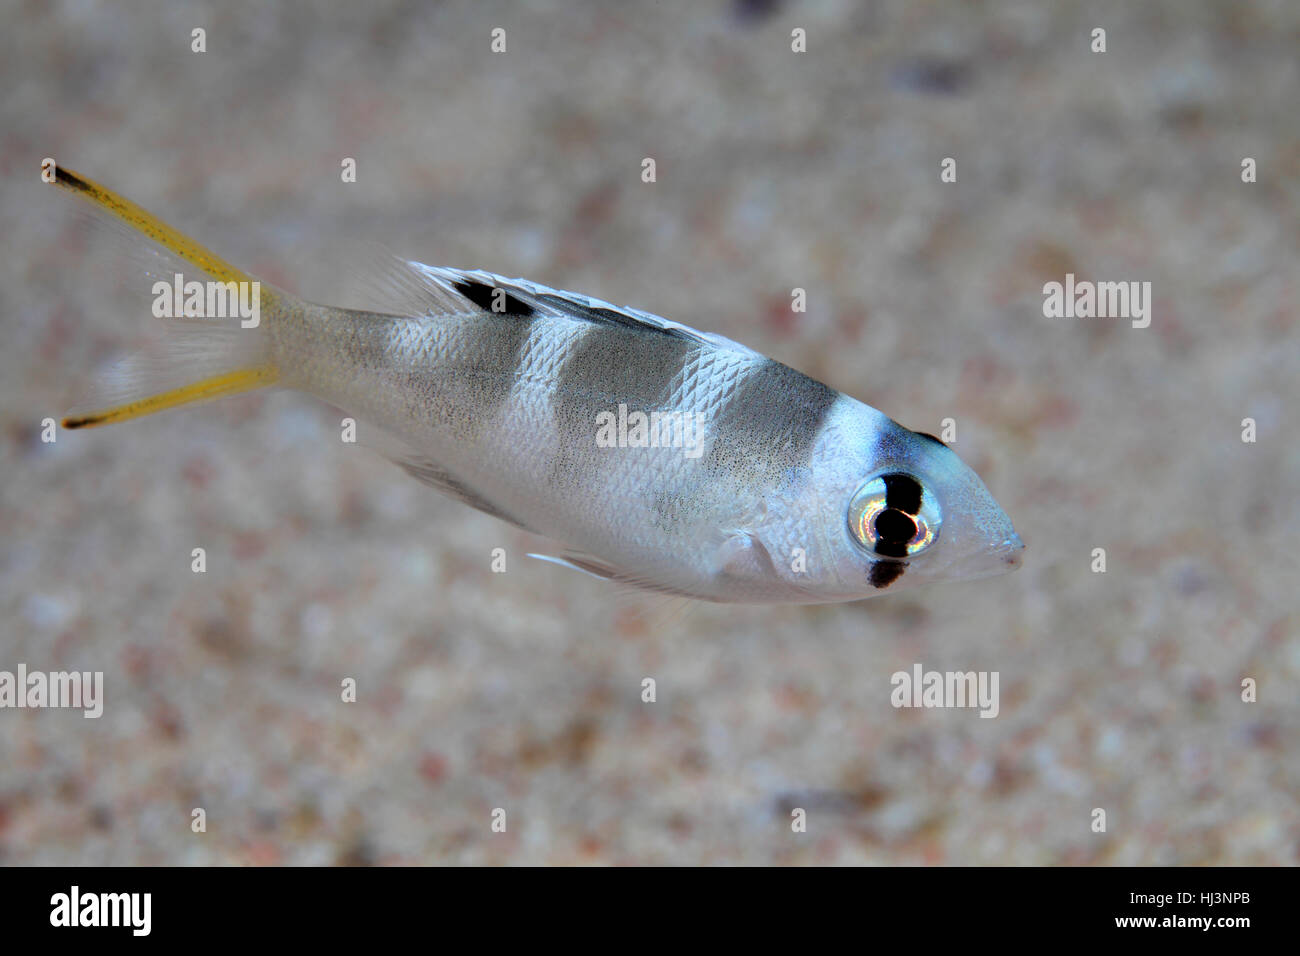 Juvenile bigeye emperor fish (Monotaxis grandoculis) underwater in the tropical reef of the red sea Stock Photo